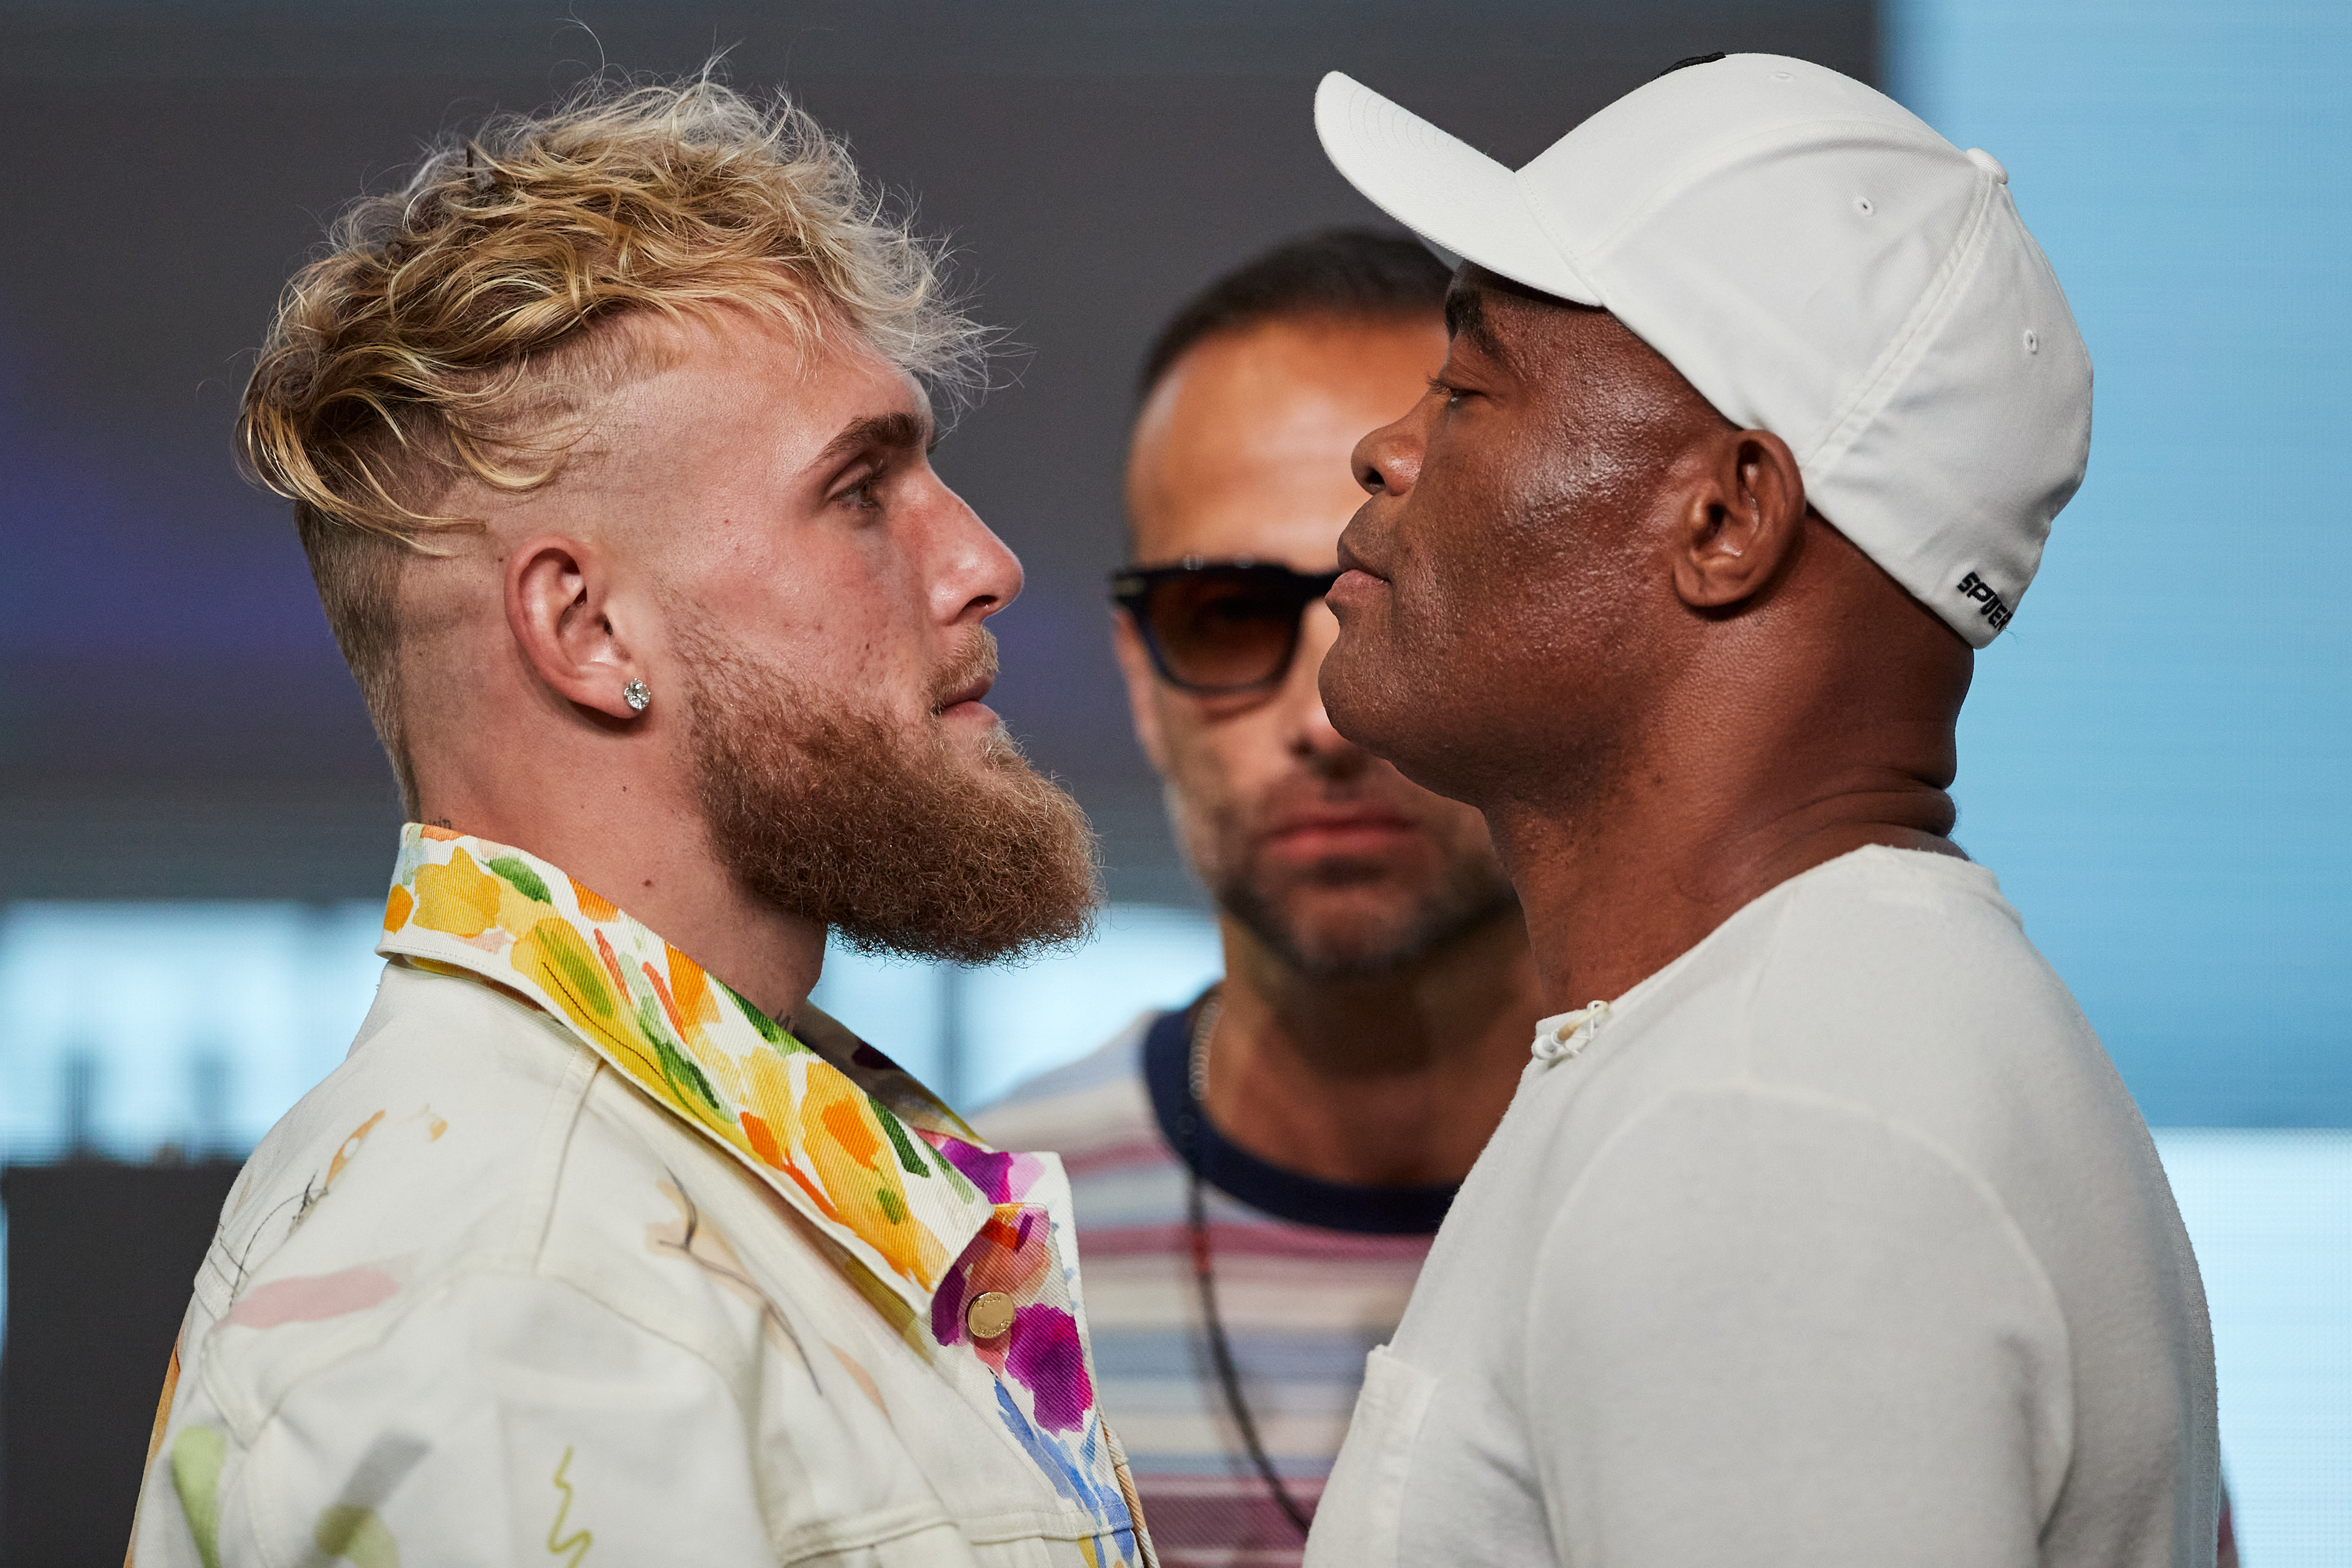 , KSI is never going to get in the ring with me so I’ll prove I’m better by beating his coach Viddal Riley, says Jake Paul